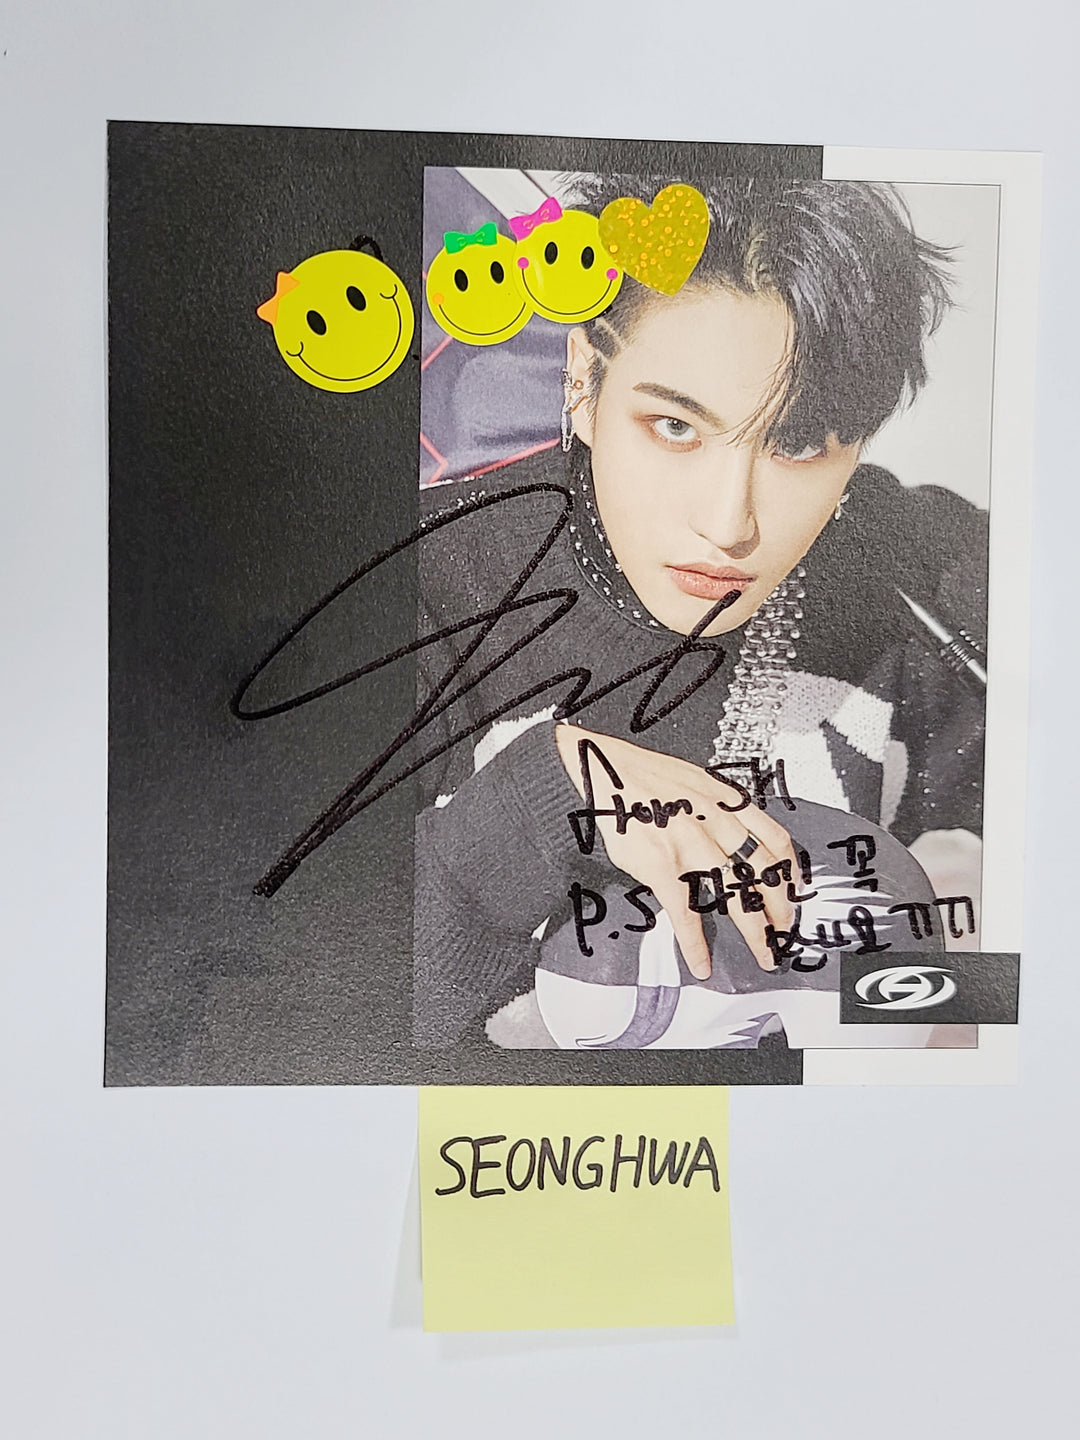 SeongHwa  (of Ateez) "The World Ep.1 - MOVEMENT" - A Cut Page From Fansign Event Album